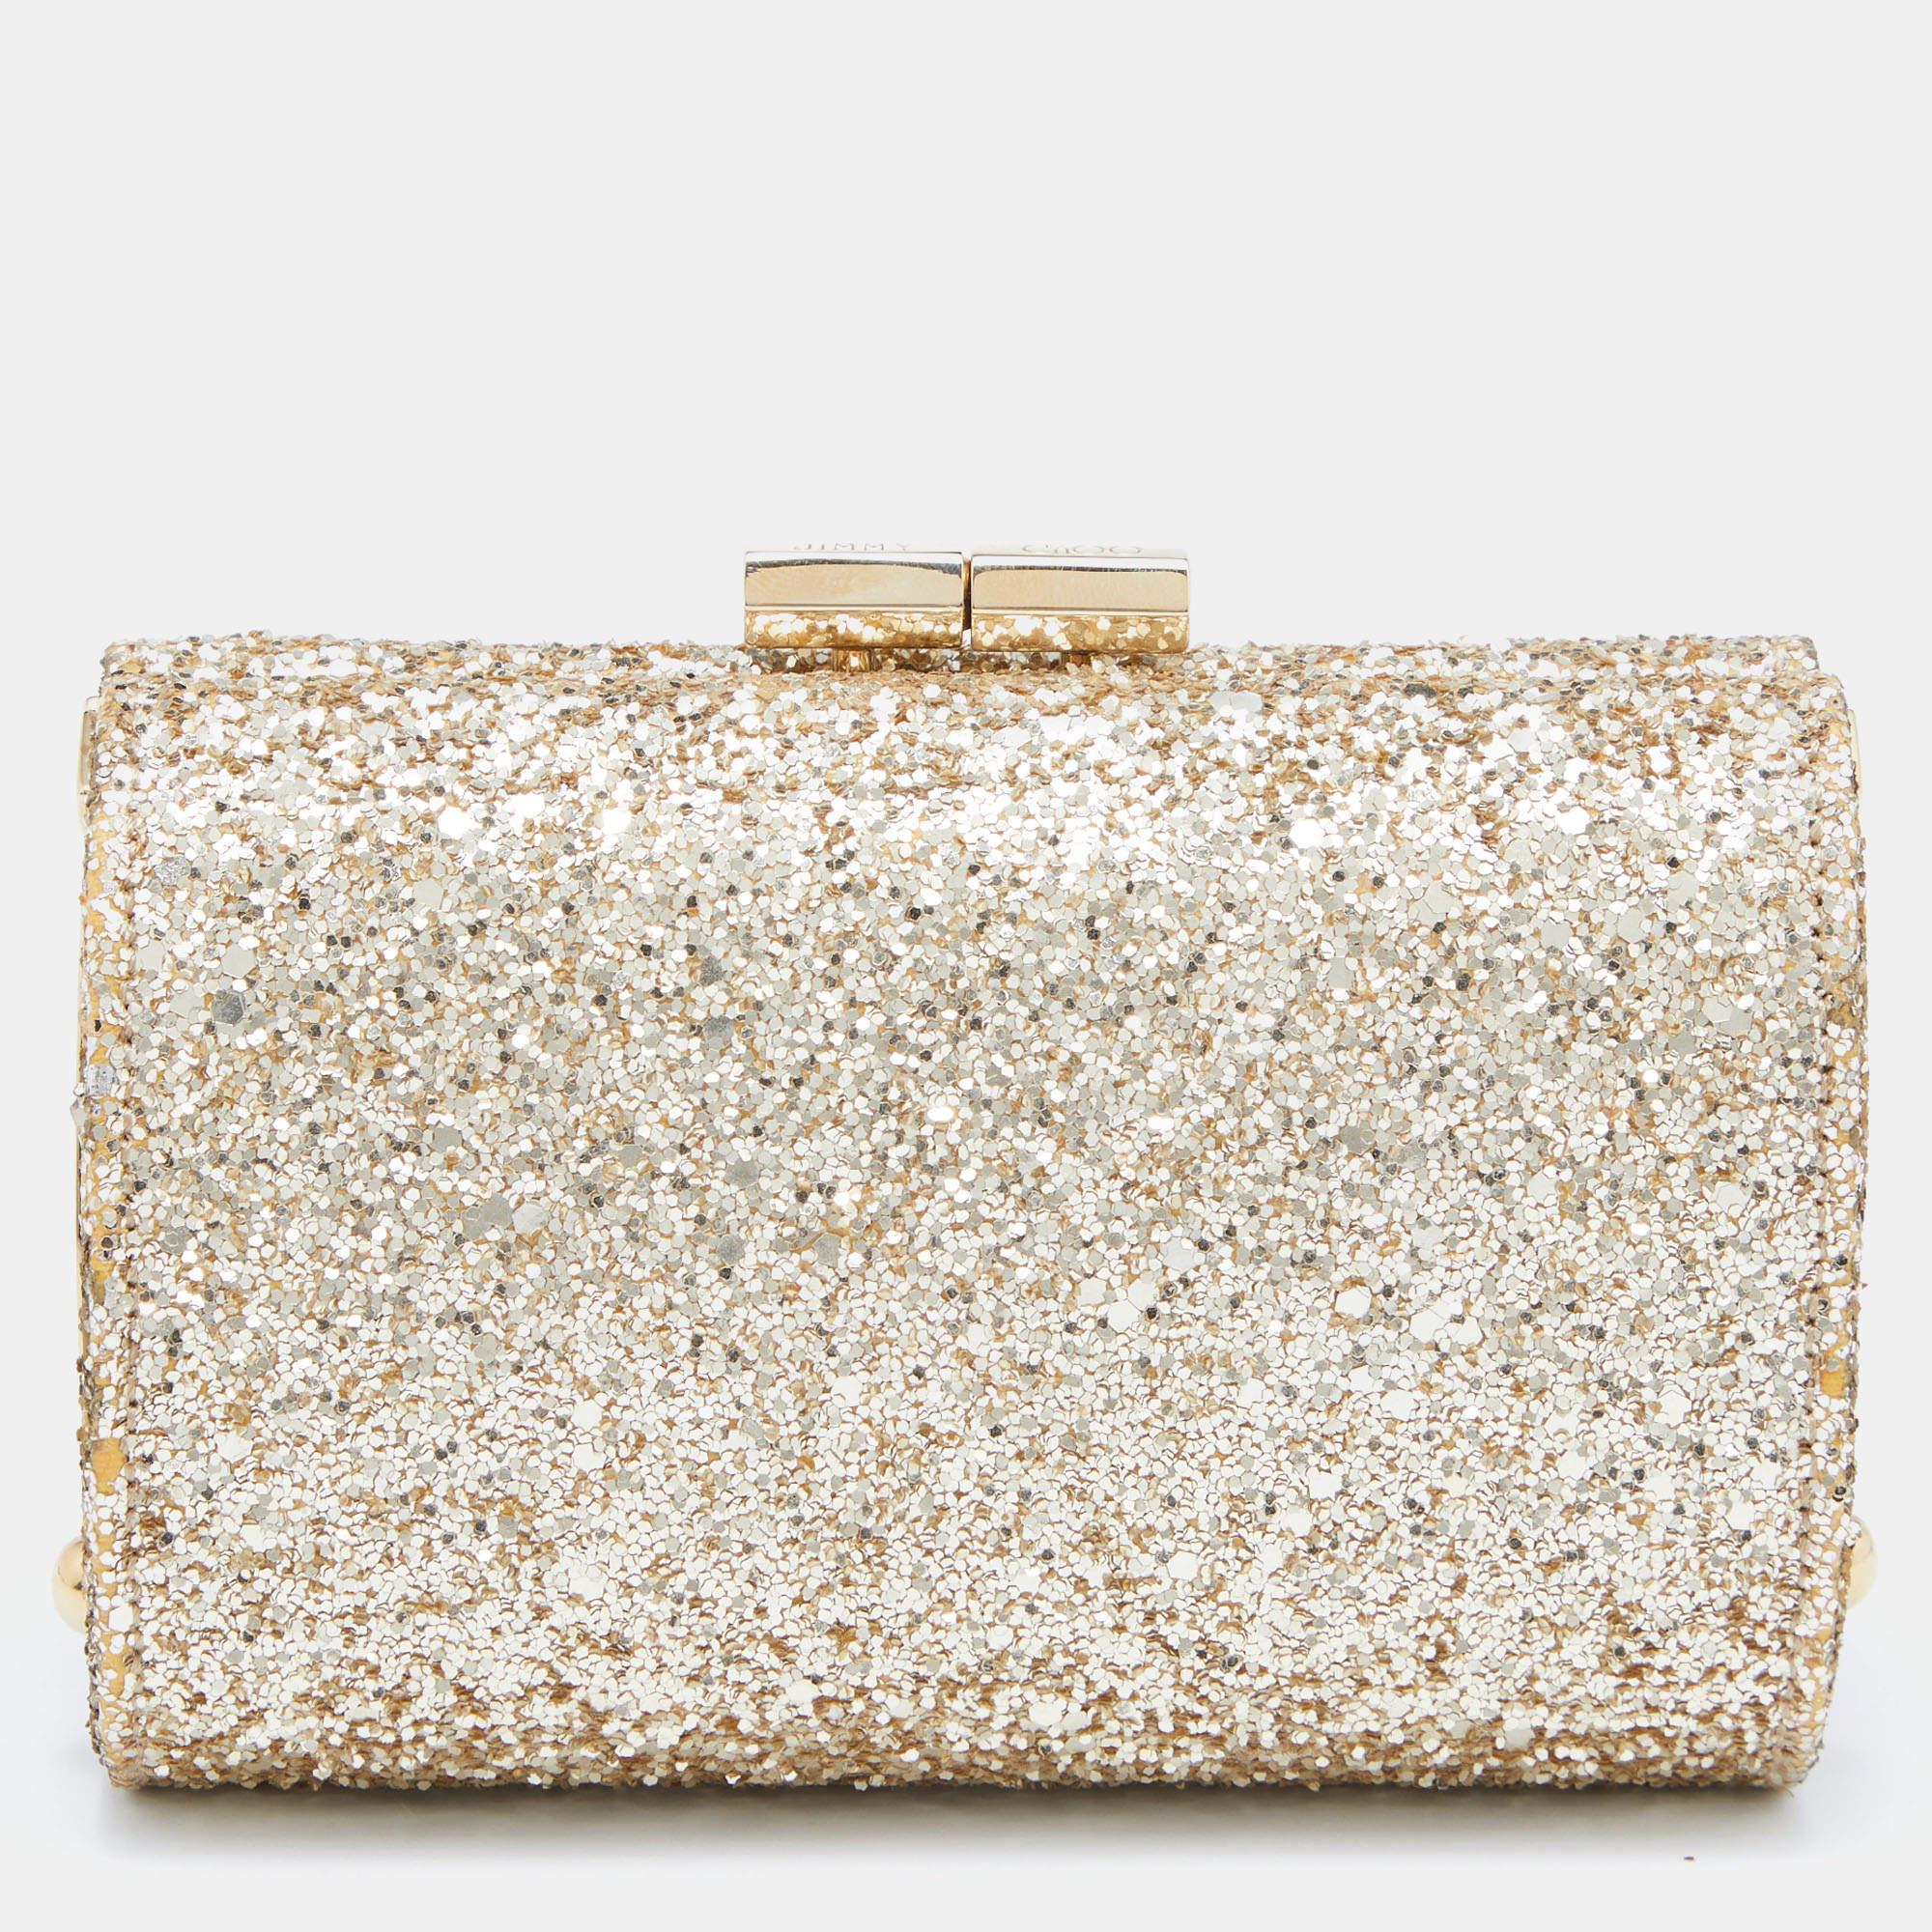 This Jimmy Choo clutch has a shimmery glitter exterior enhanced with gold-tone hardware. The satin-lined interior is sized to hold all your party essentials. This easy-to-carry clutch will garner you many compliments.

